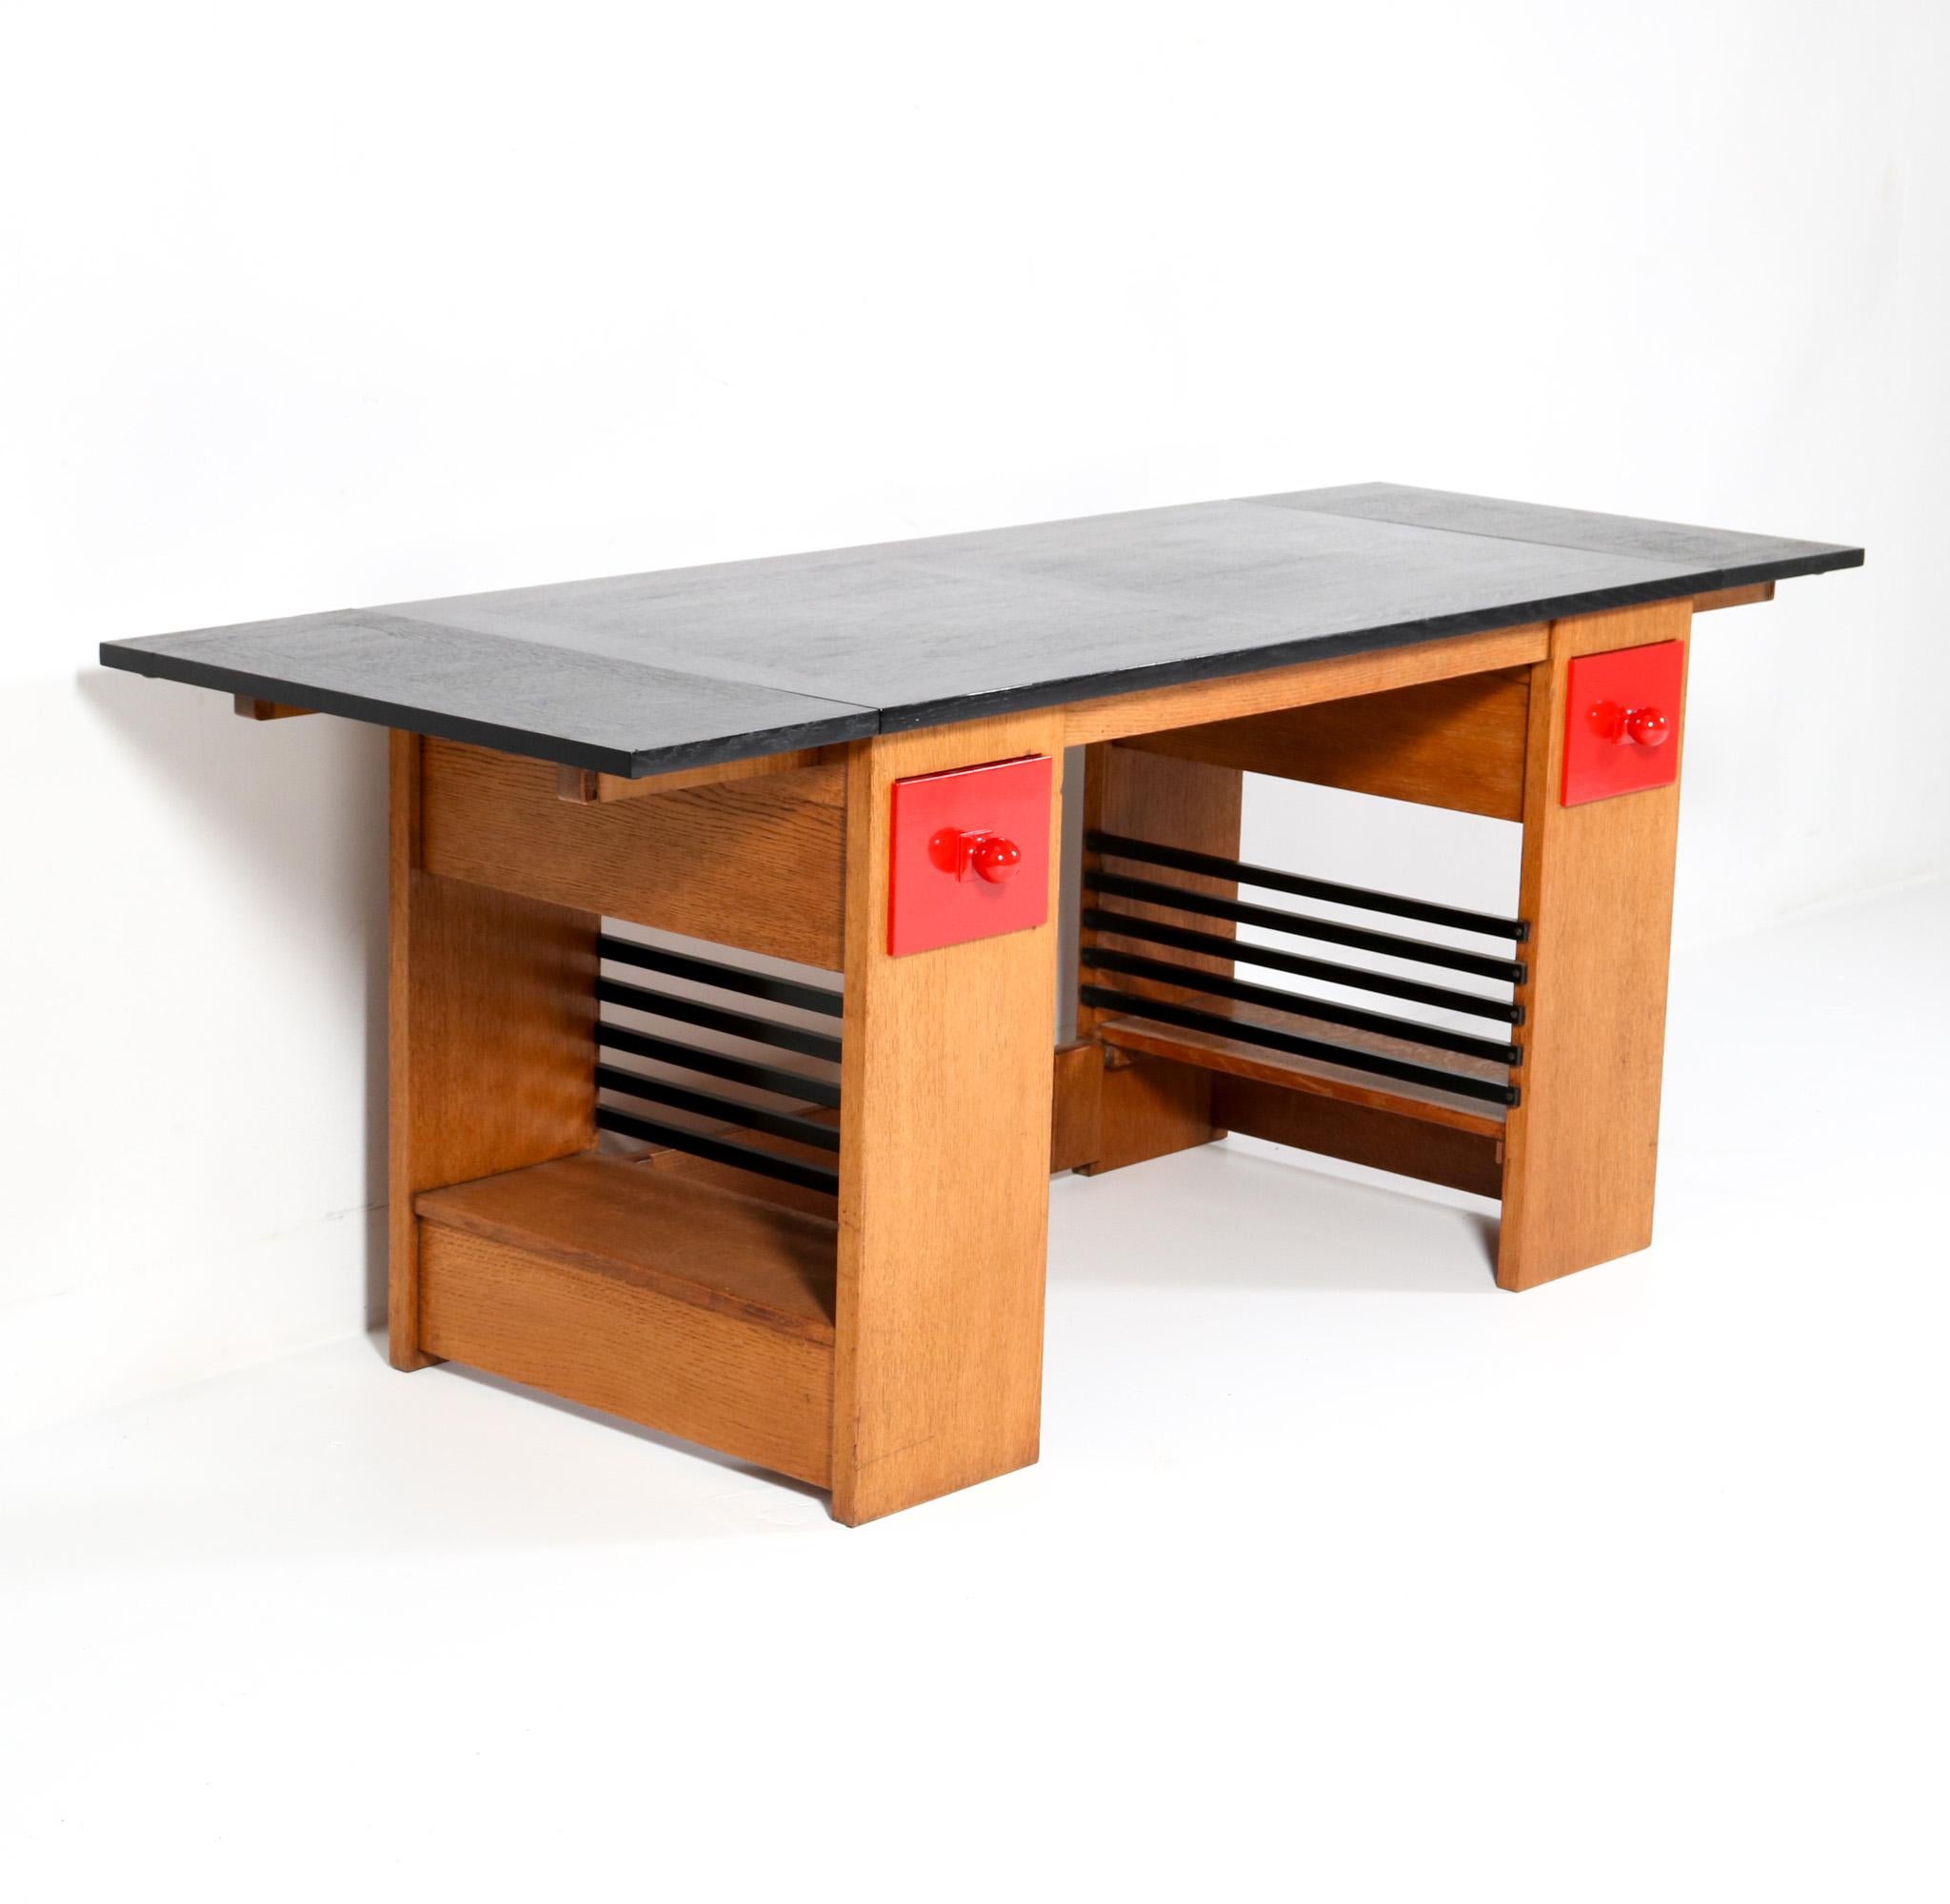 Oak Art Deco Modernist Desk or Writing Table by Hendrik Wouda for Pander, 1920s For Sale 1